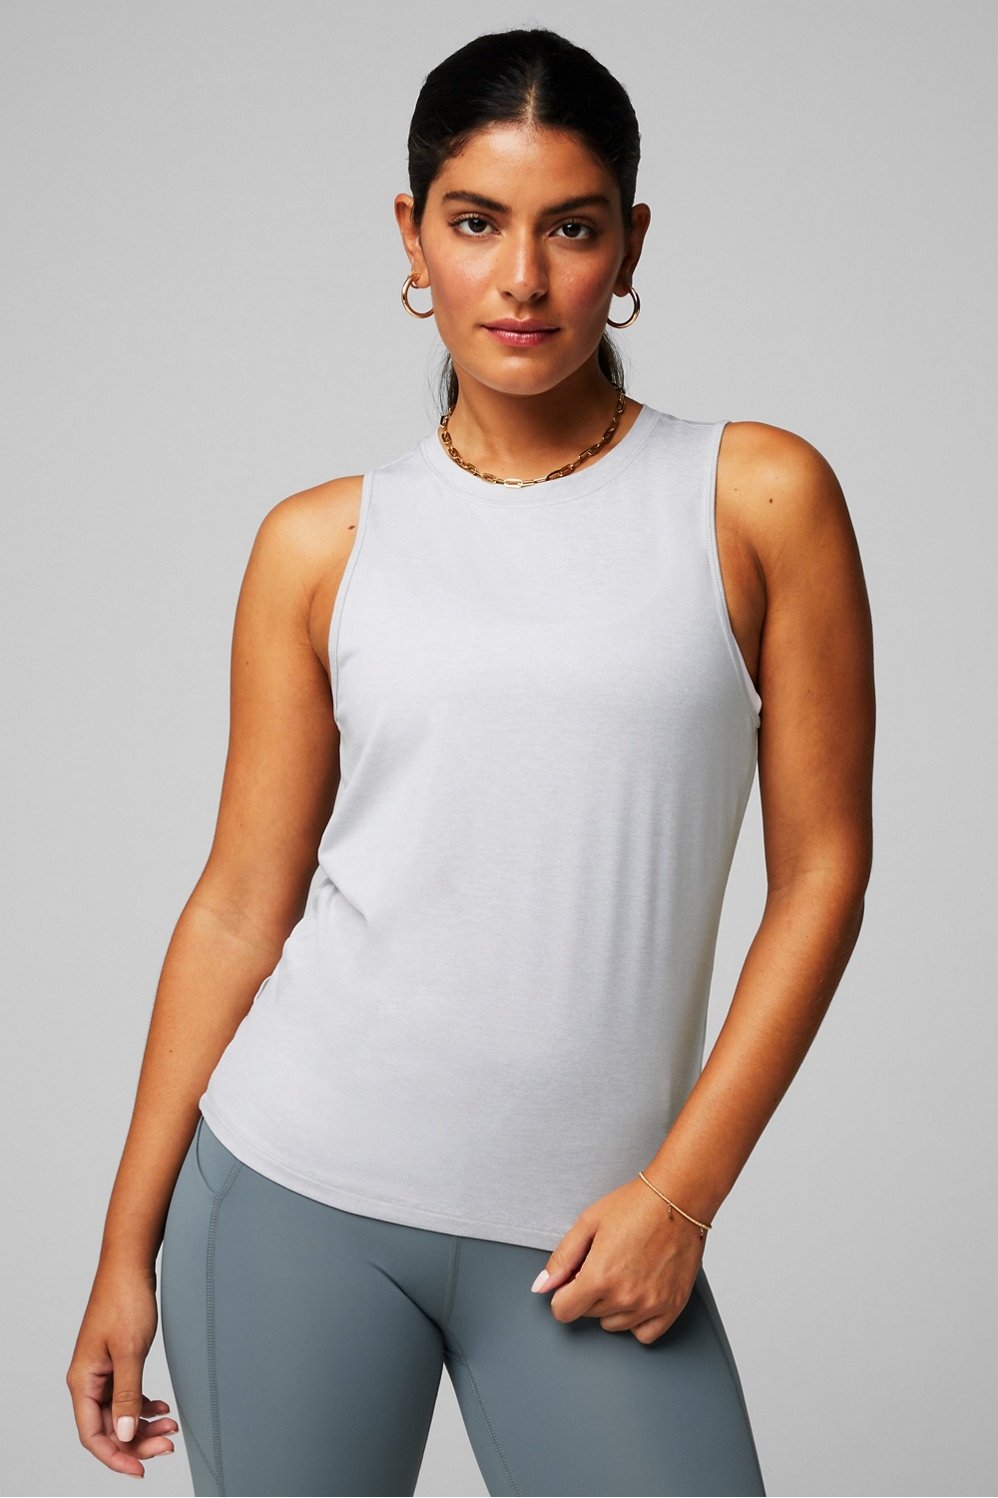  Fabletics Women's Dry-Flex Muscle Tank, Workout, Gym, Running,  Fitness Tank Top, Sleeveless, Knit, XXL, White : Clothing, Shoes & Jewelry